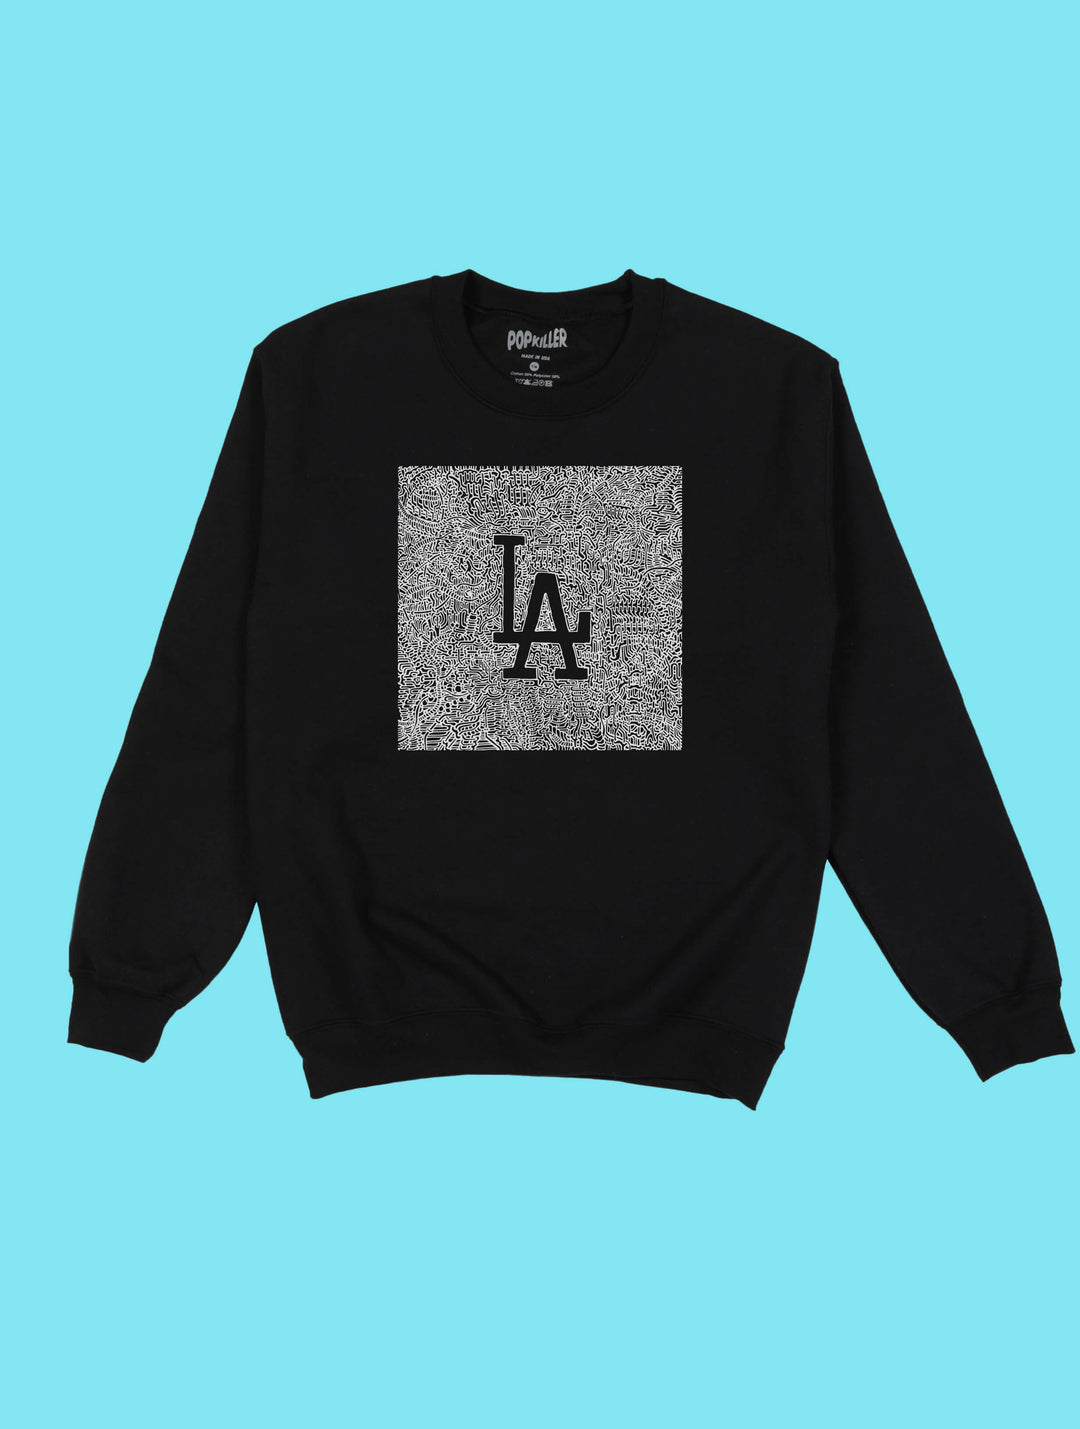 White illustration of Los Angeles on a black graphic sweater.